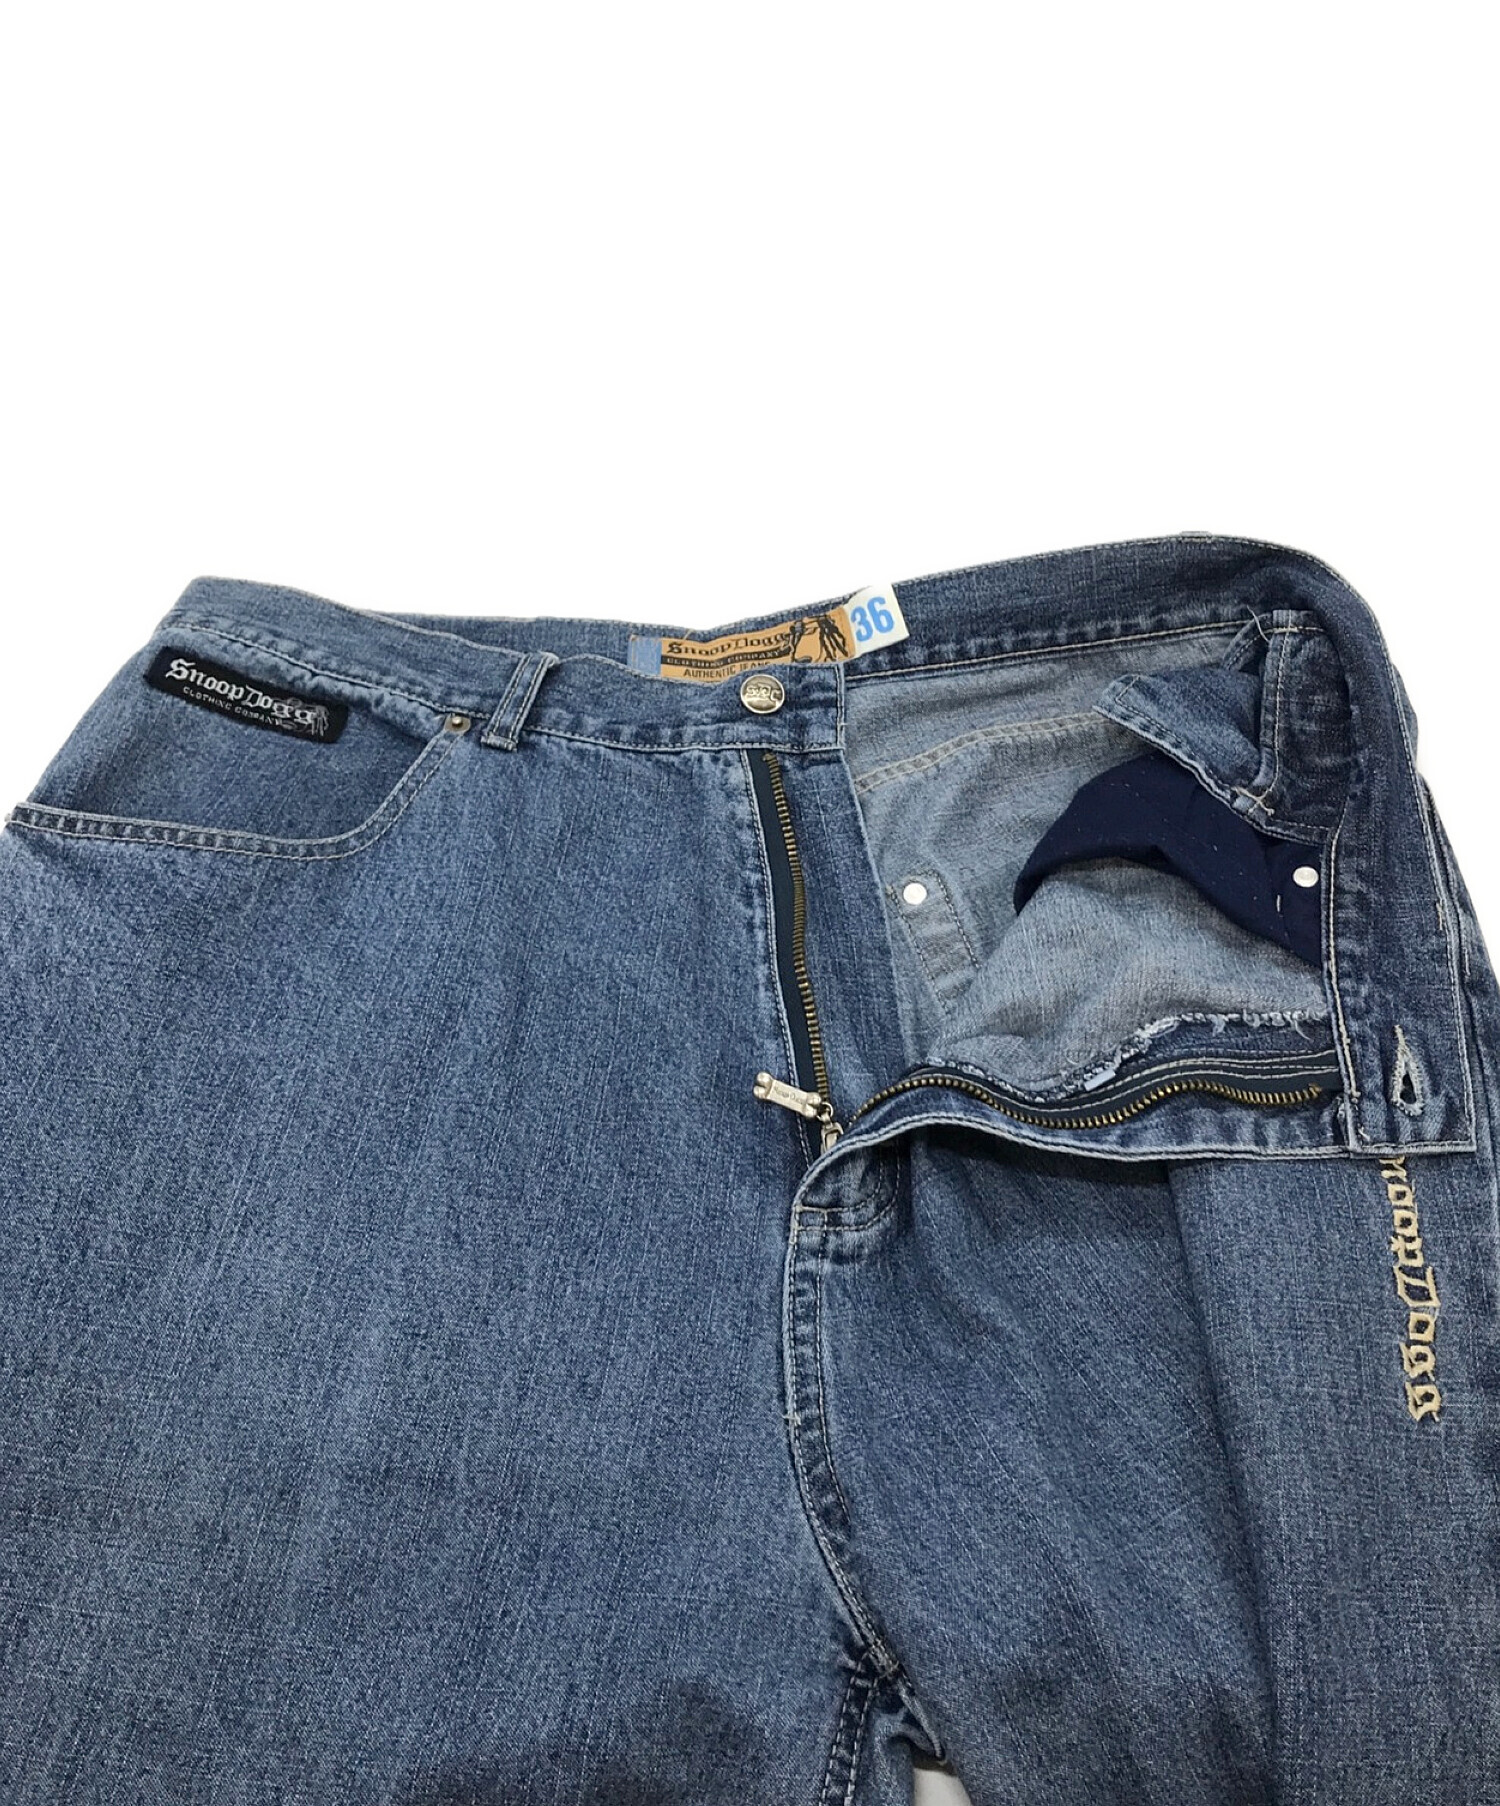 SNOOP DOG JEANS スヌープドッグジーンズ 90s VINTAGE